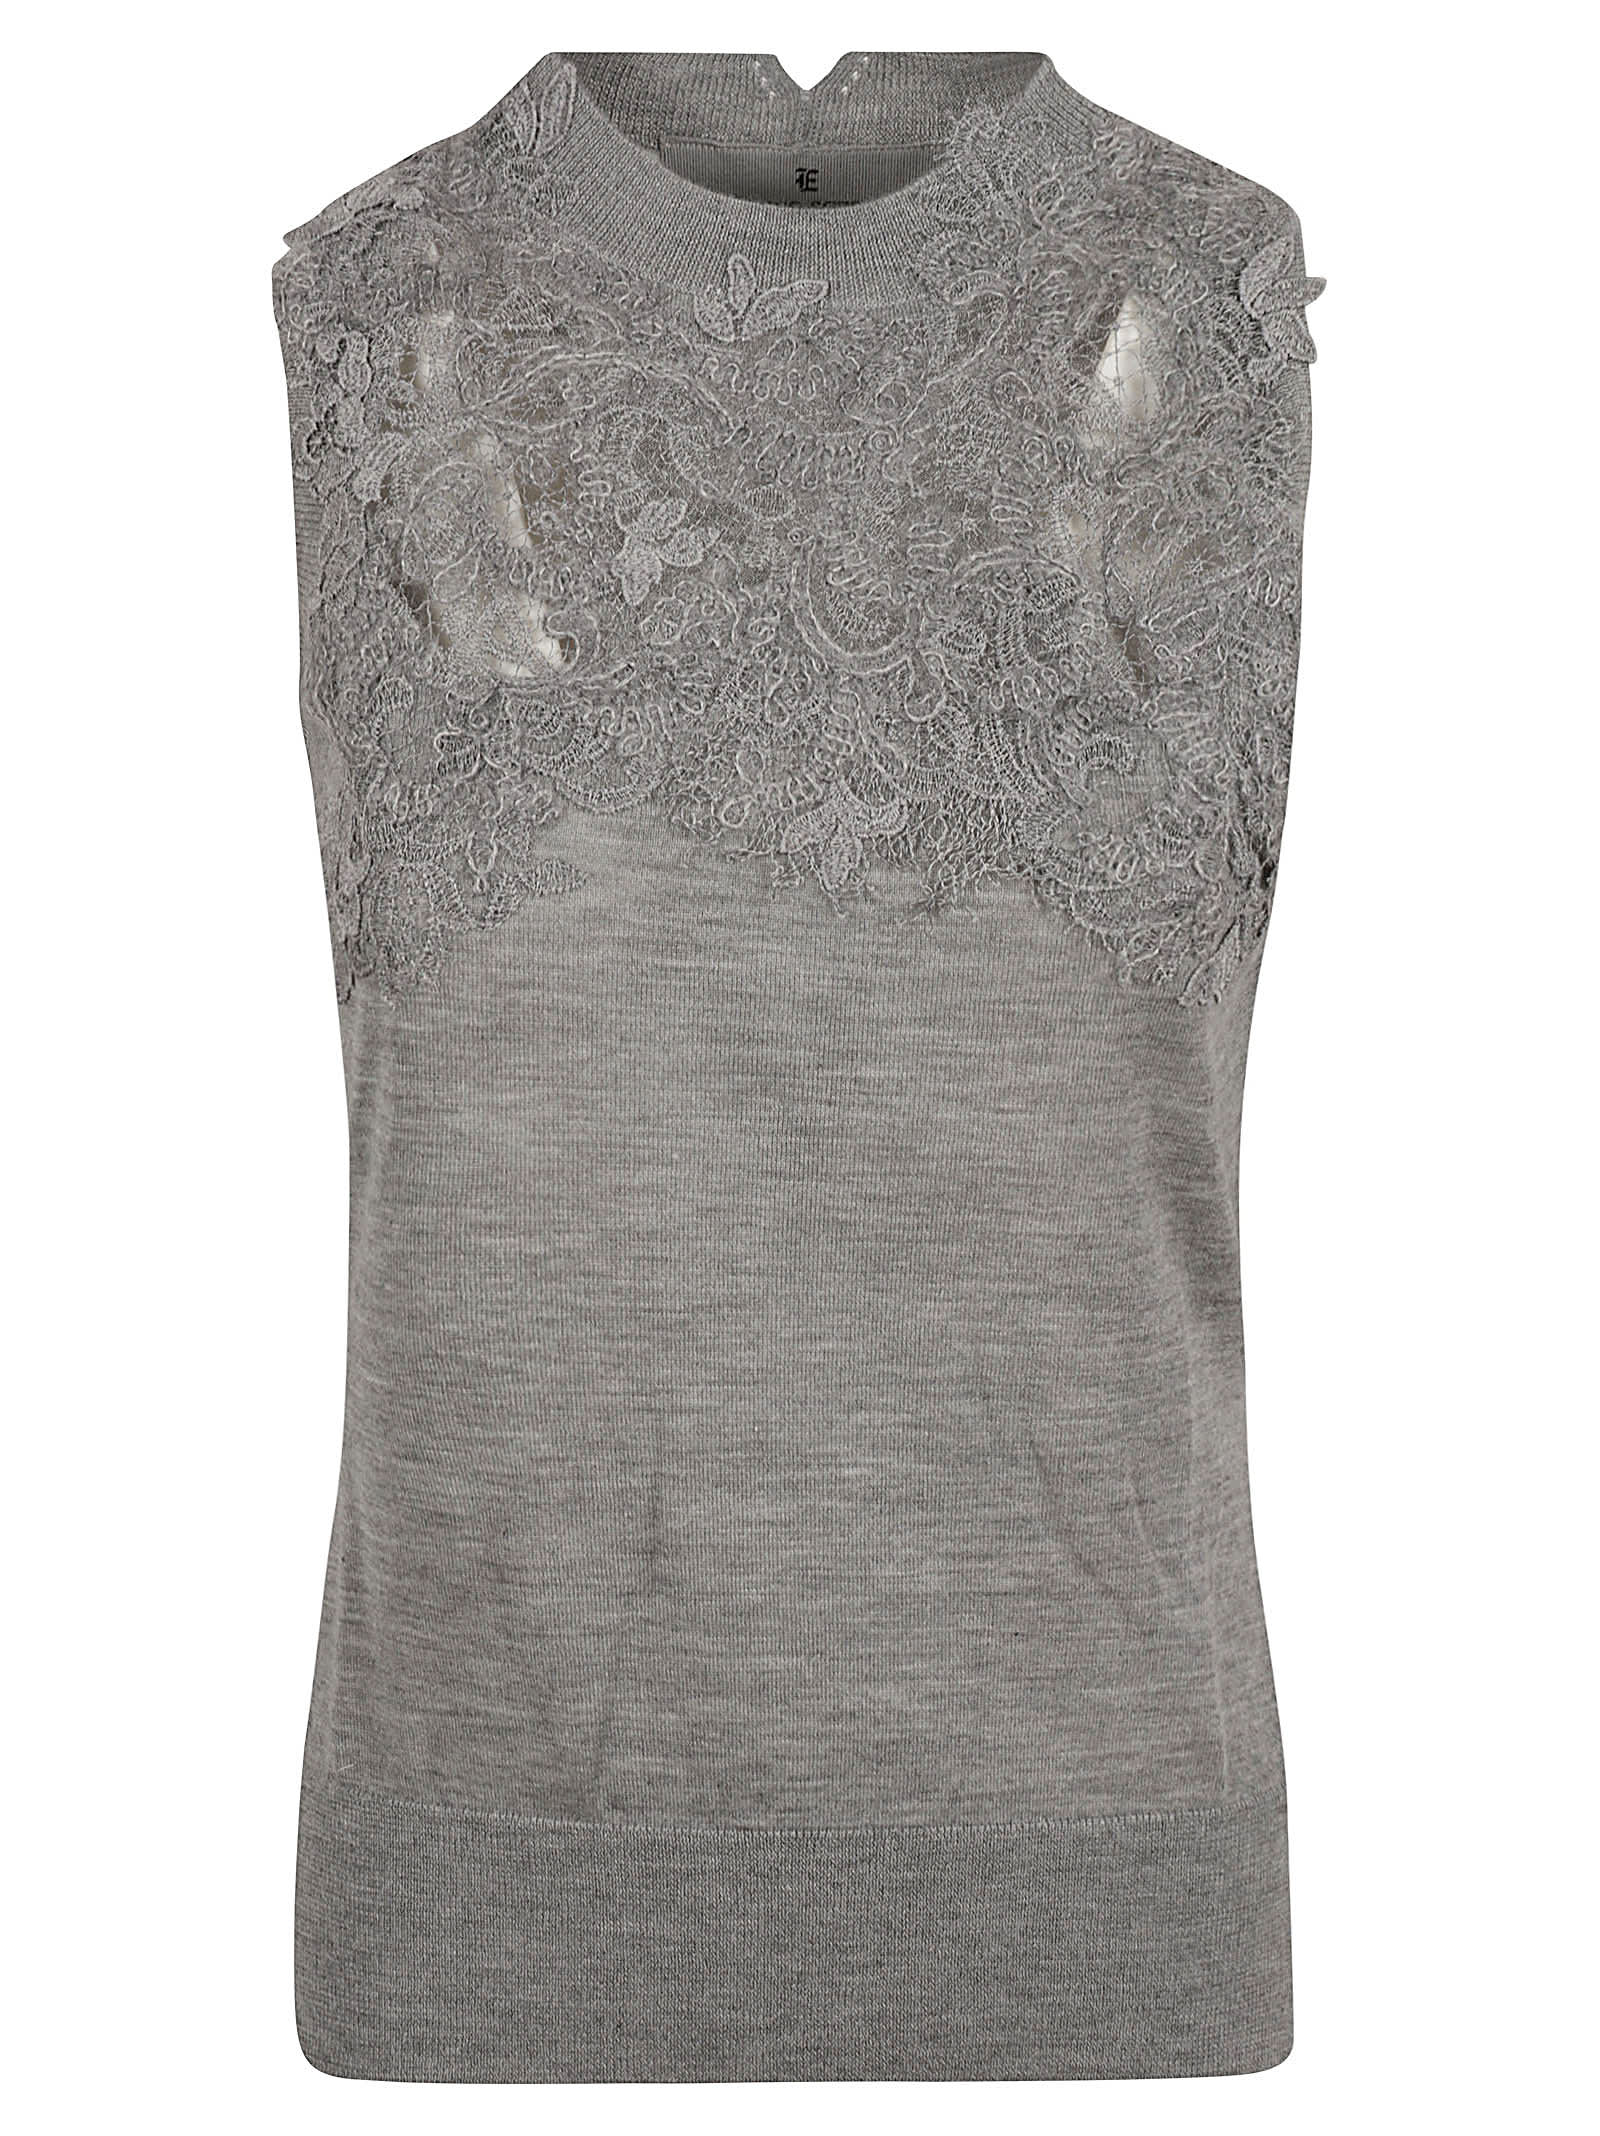 Laced Sleeveless Top